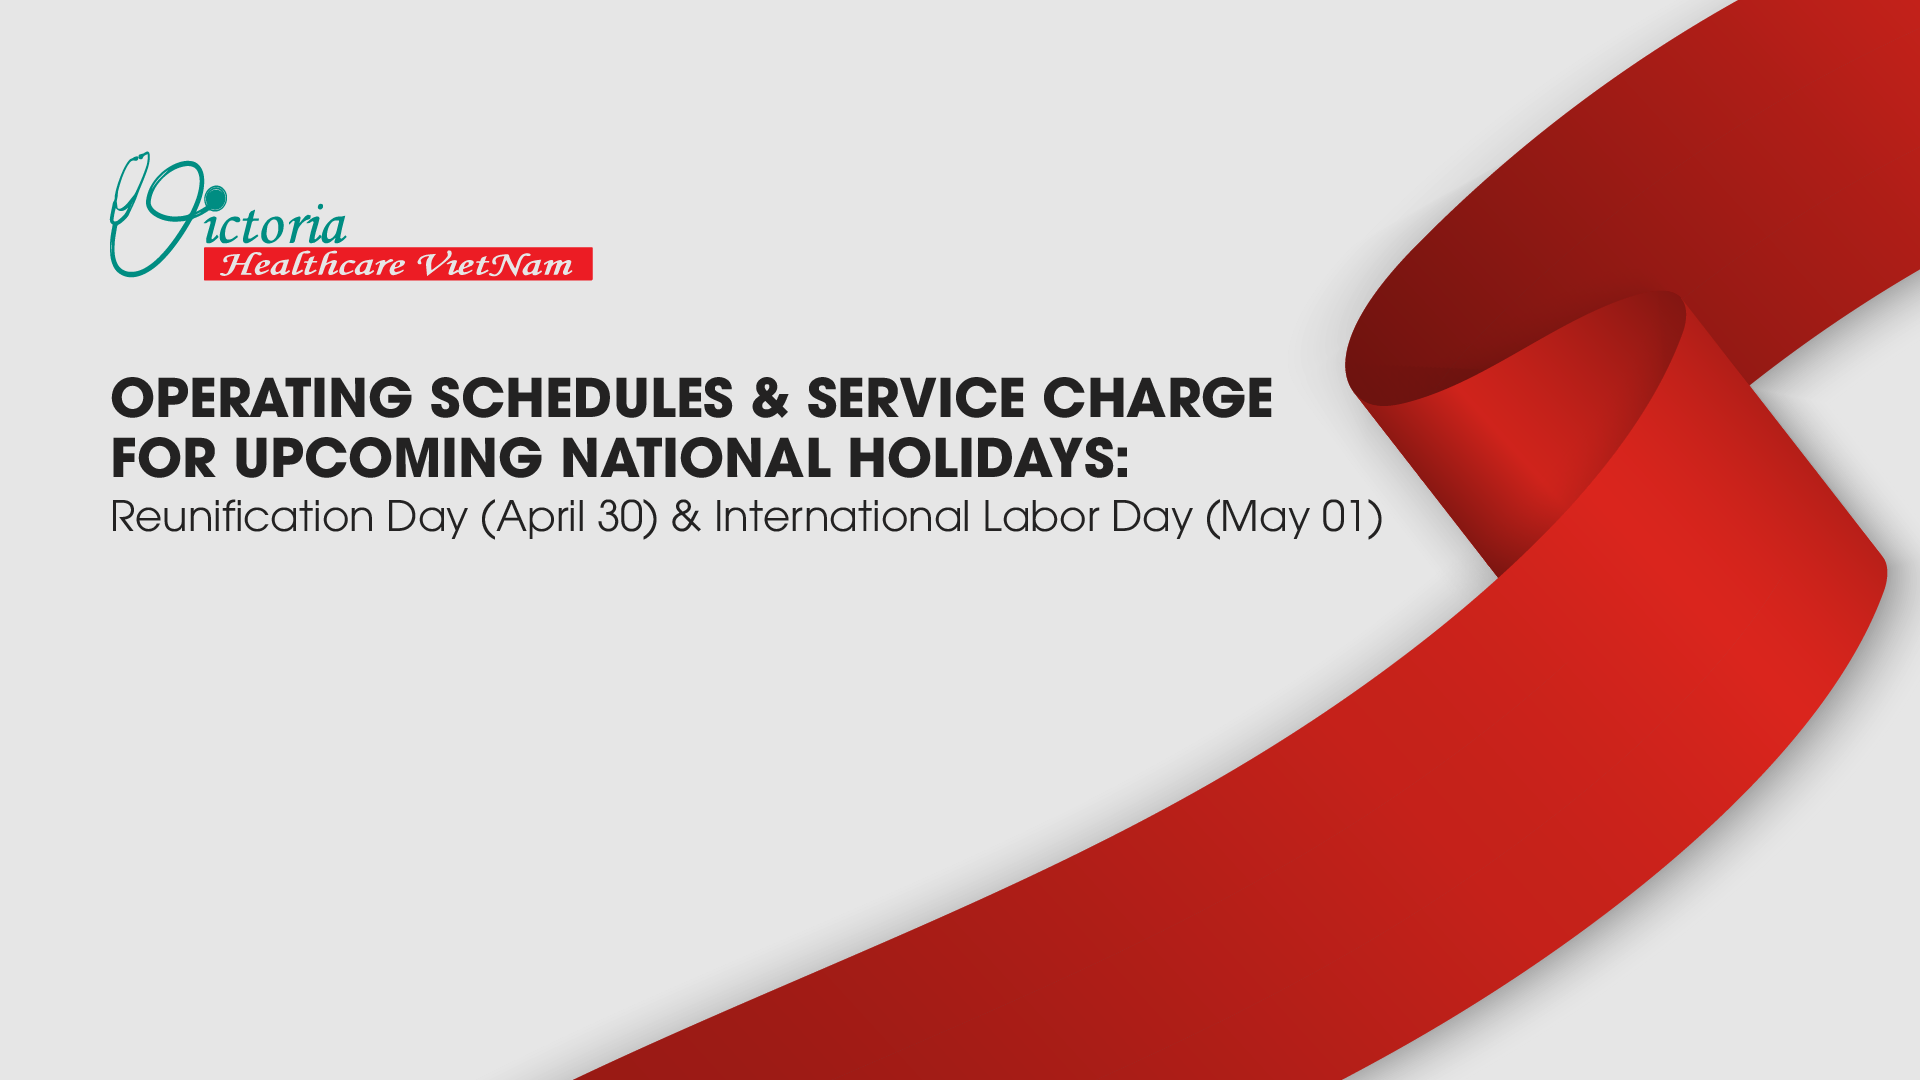 Operating schedules & service charge  for upcoming National Holidays:  Reunification Day (April 30) & International Labor Day (May 01)